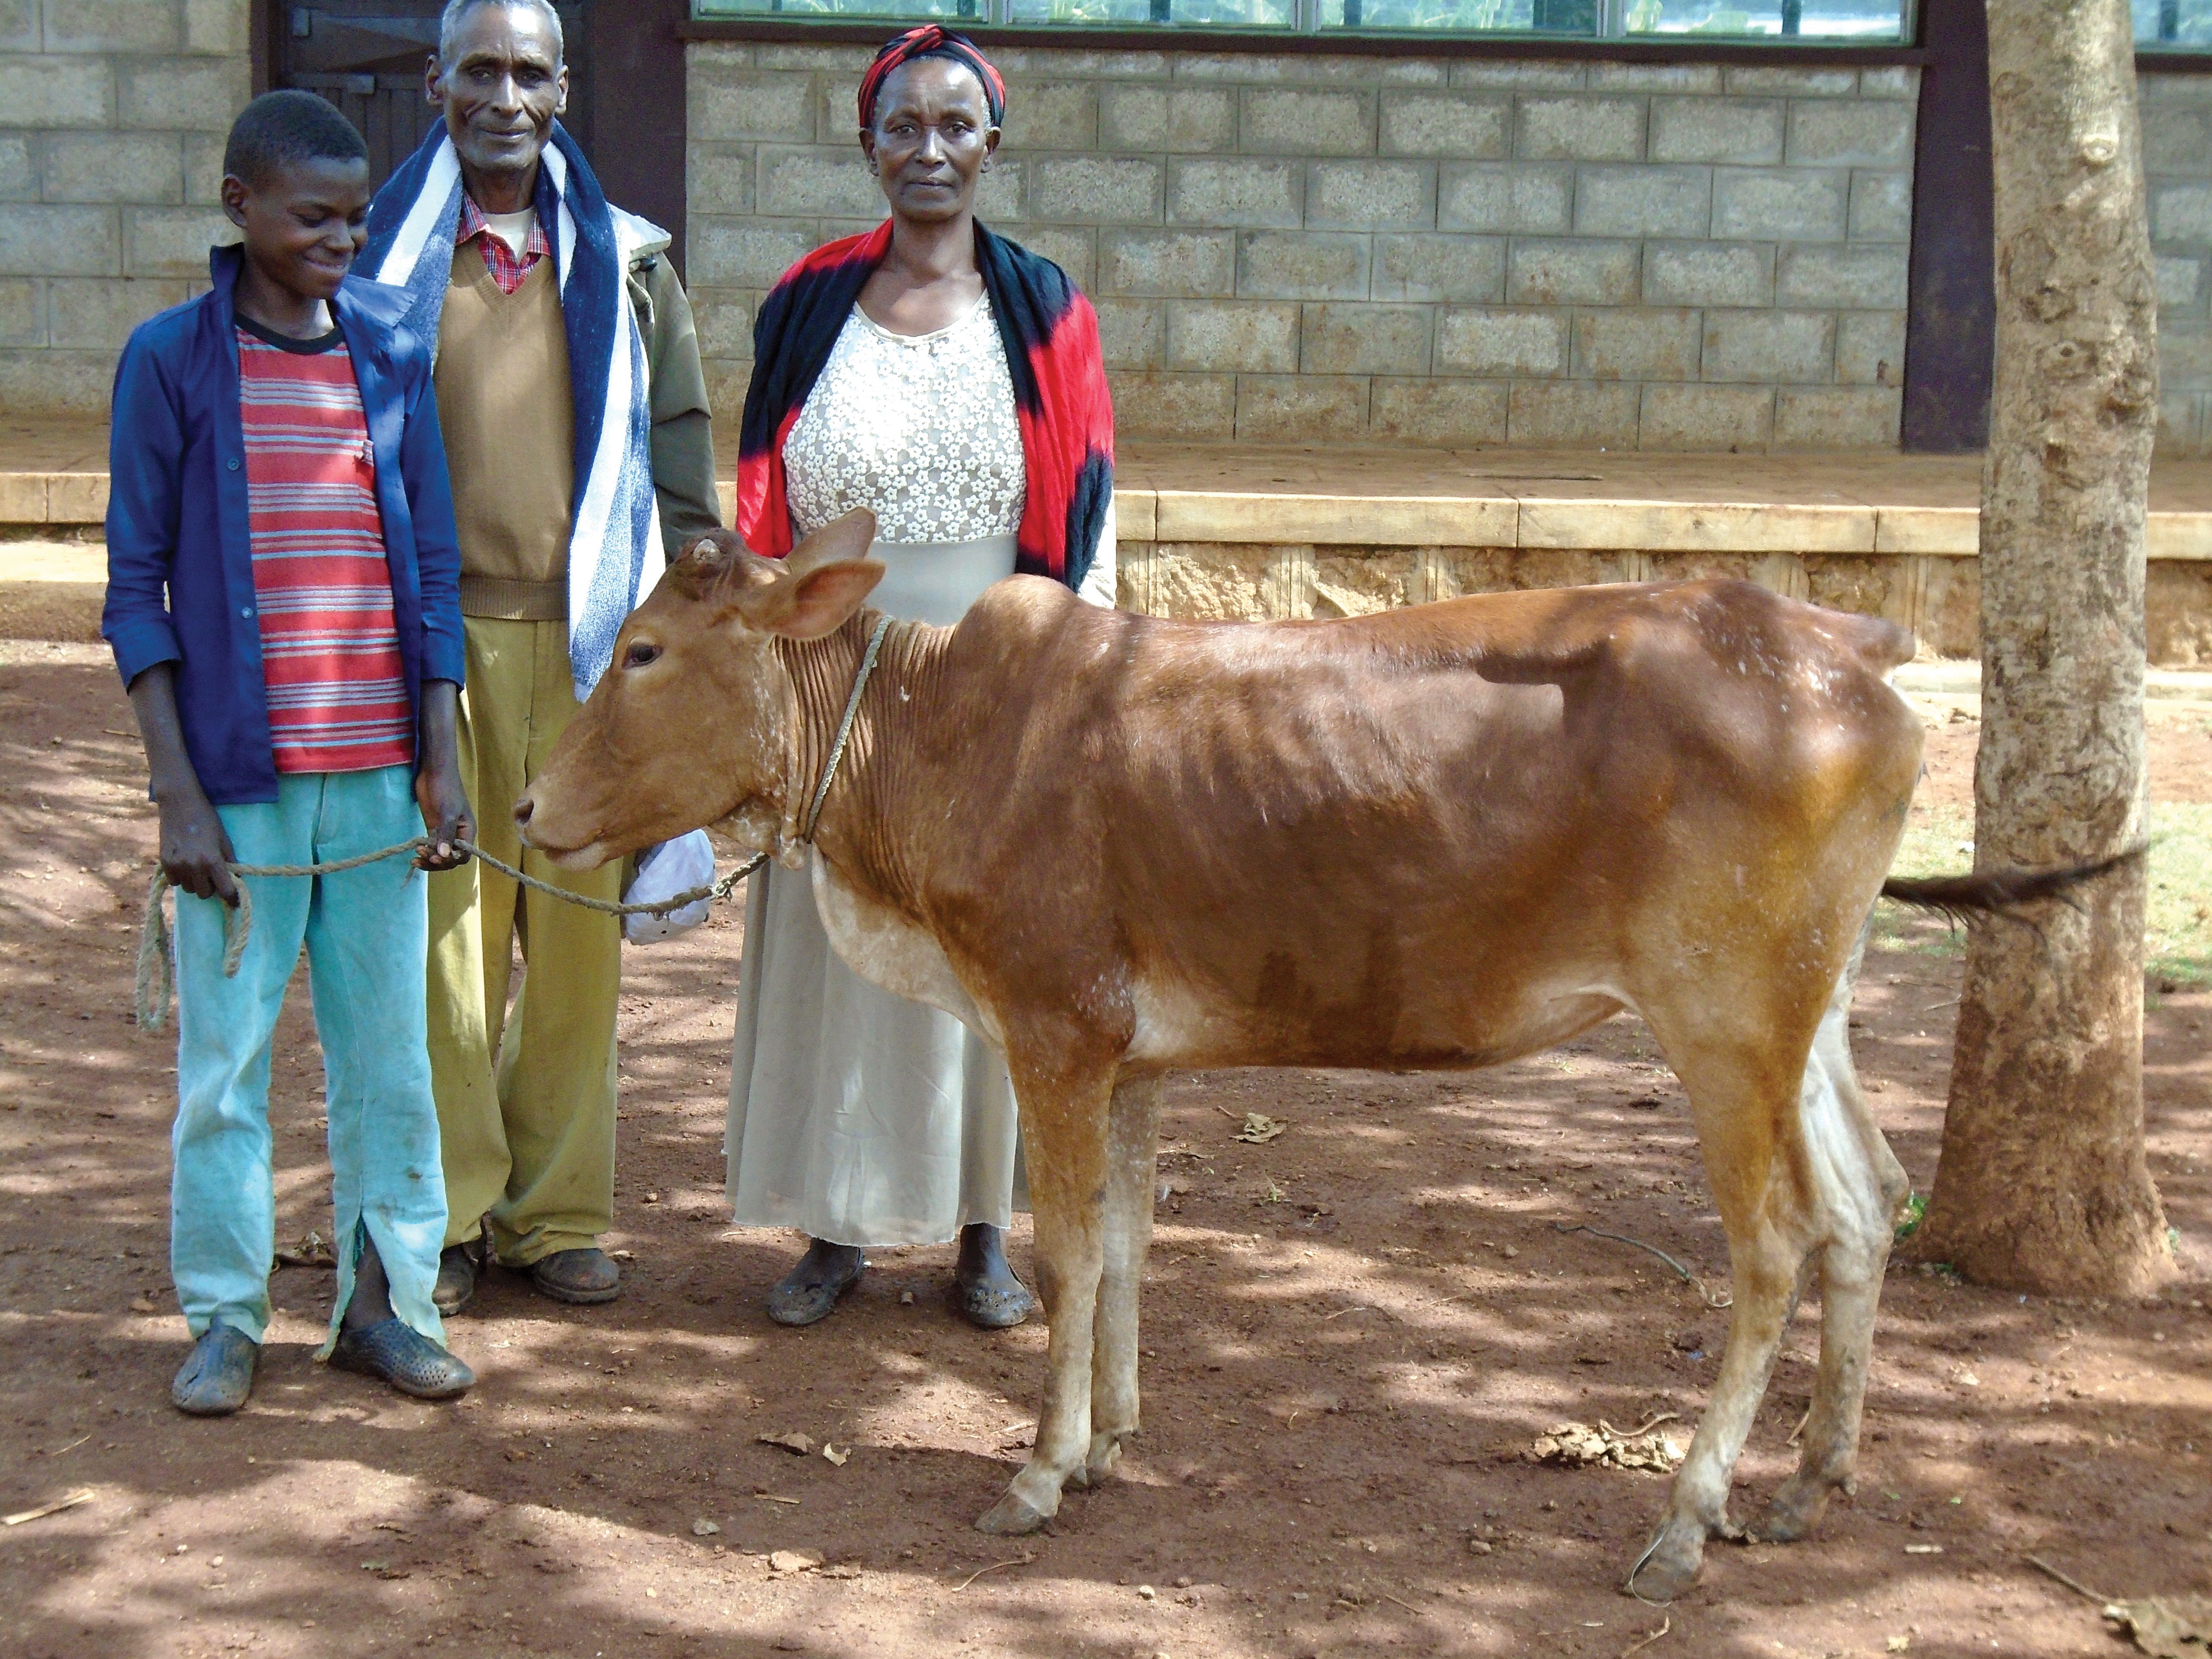 Tesfahun and his family are so thankful for their new cow and say they are blessed by the Fishers’ “generosity and warm hearts.”